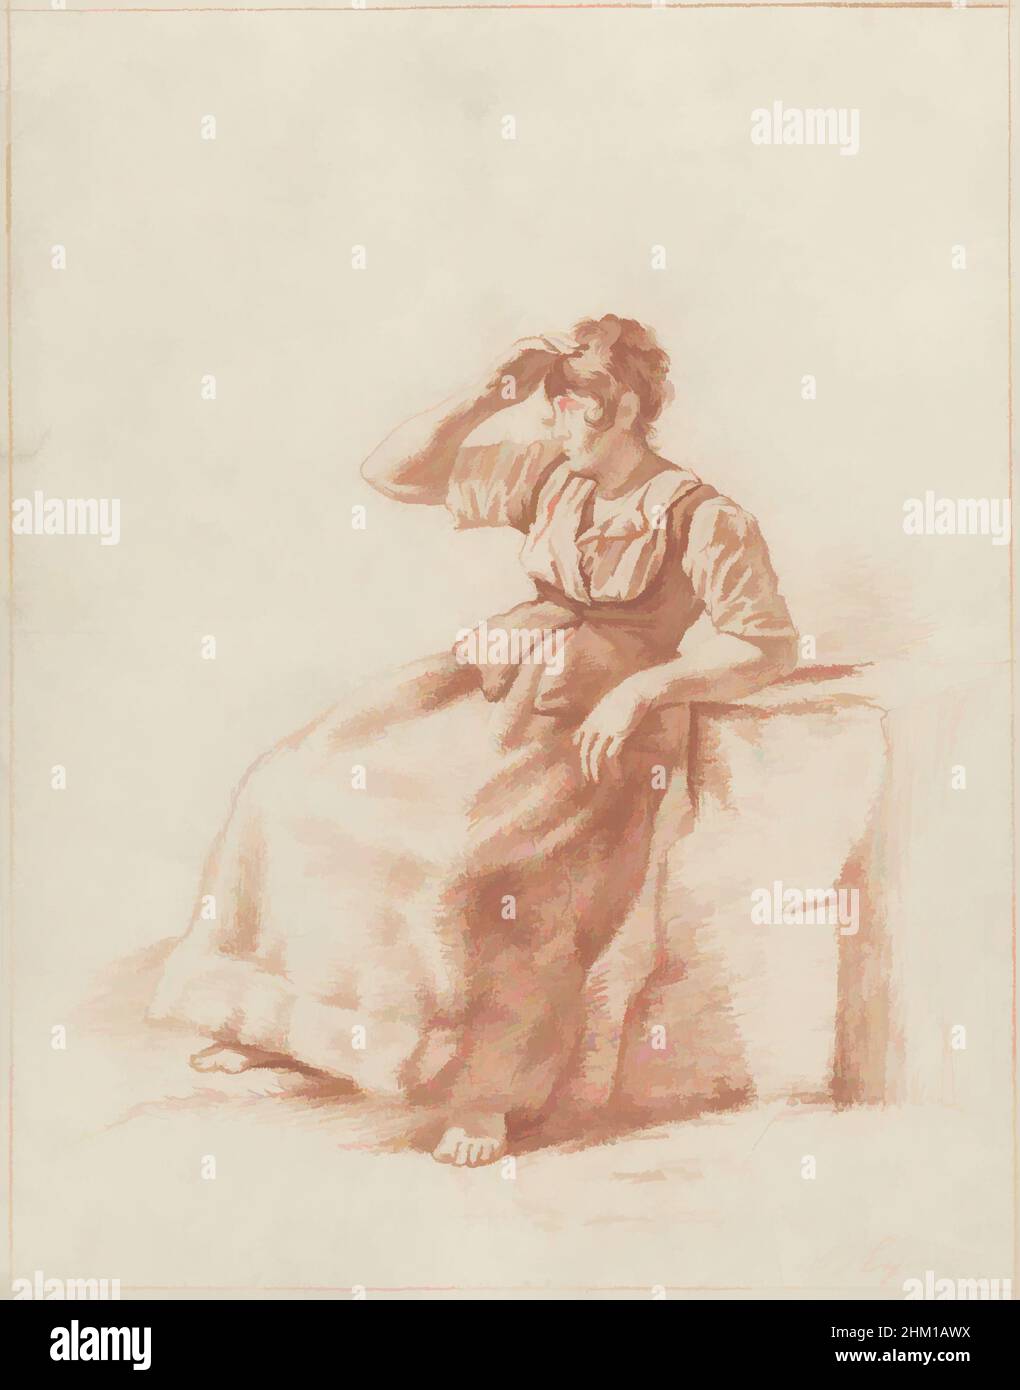 Art inspired by Seated peasant girl, draughtsman: Arnoldus Johannes Eymer, 1824, paper, chalk, height 250 mm × width 197 mm, Classic works modernized by Artotop with a splash of modernity. Shapes, color and value, eye-catching visual impact on art. Emotions through freedom of artworks in a contemporary way. A timeless message pursuing a wildly creative new direction. Artists turning to the digital medium and creating the Artotop NFT Stock Photo